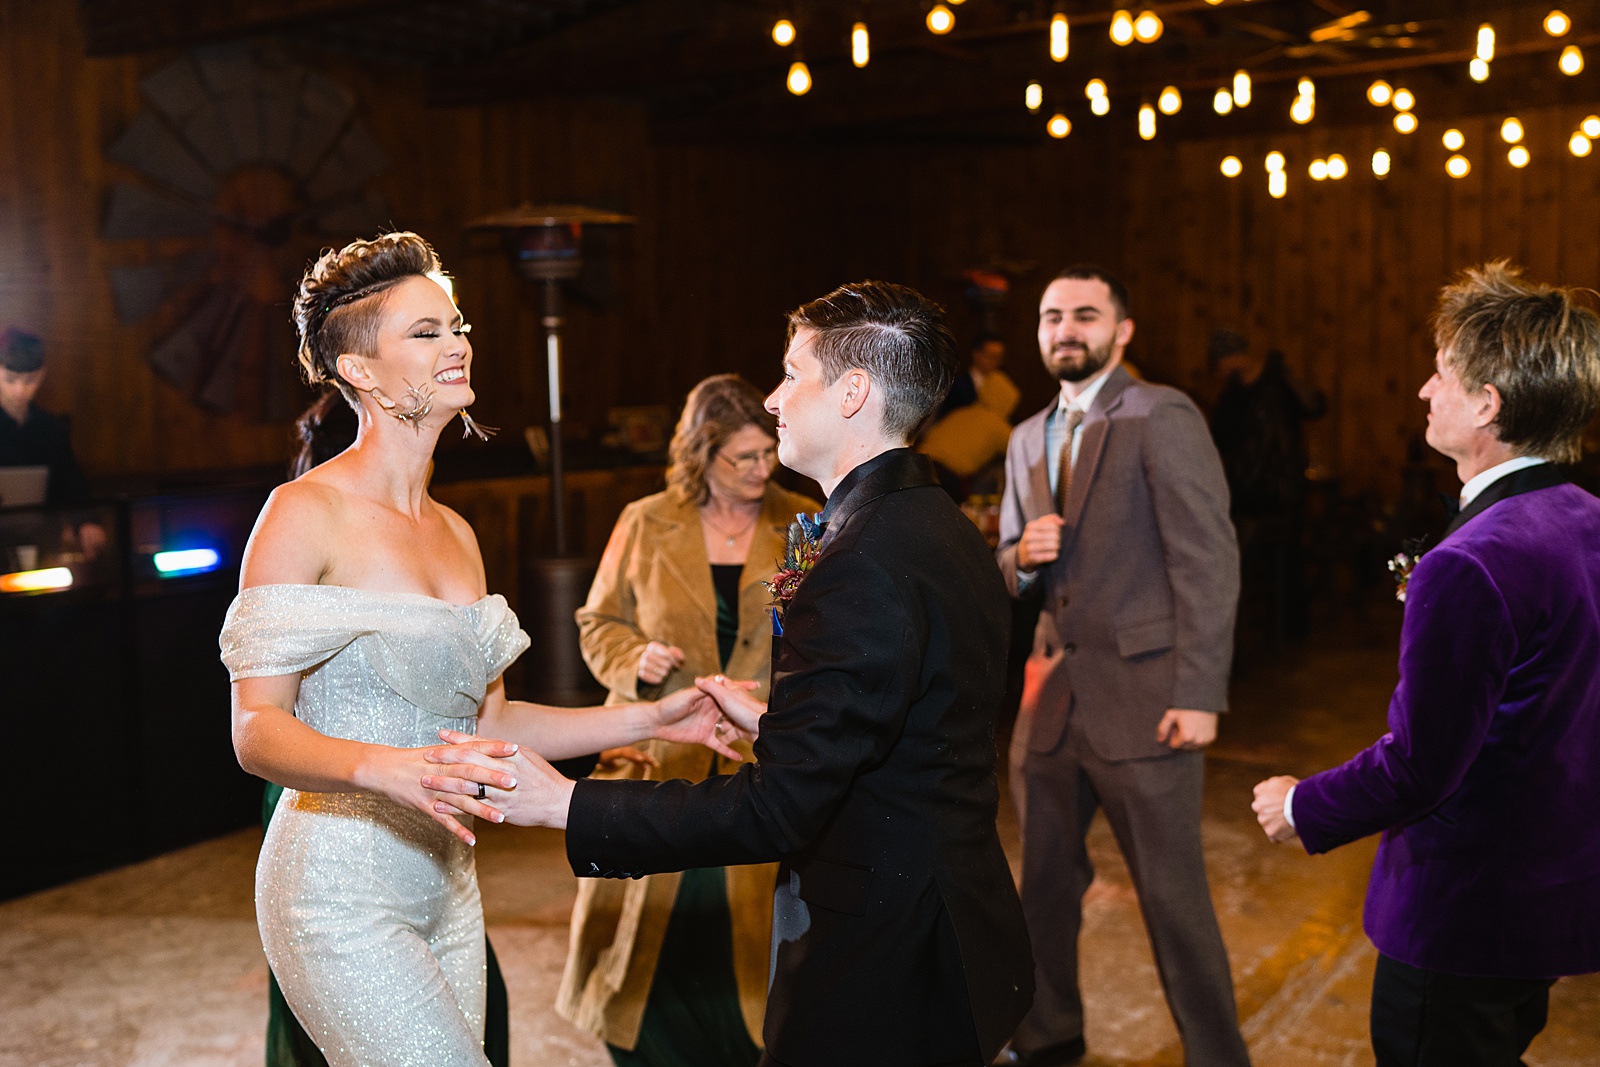 Brides dancing with guests at Mortimer Farms wedding reception by Prescott wedding photographer PMA Photography